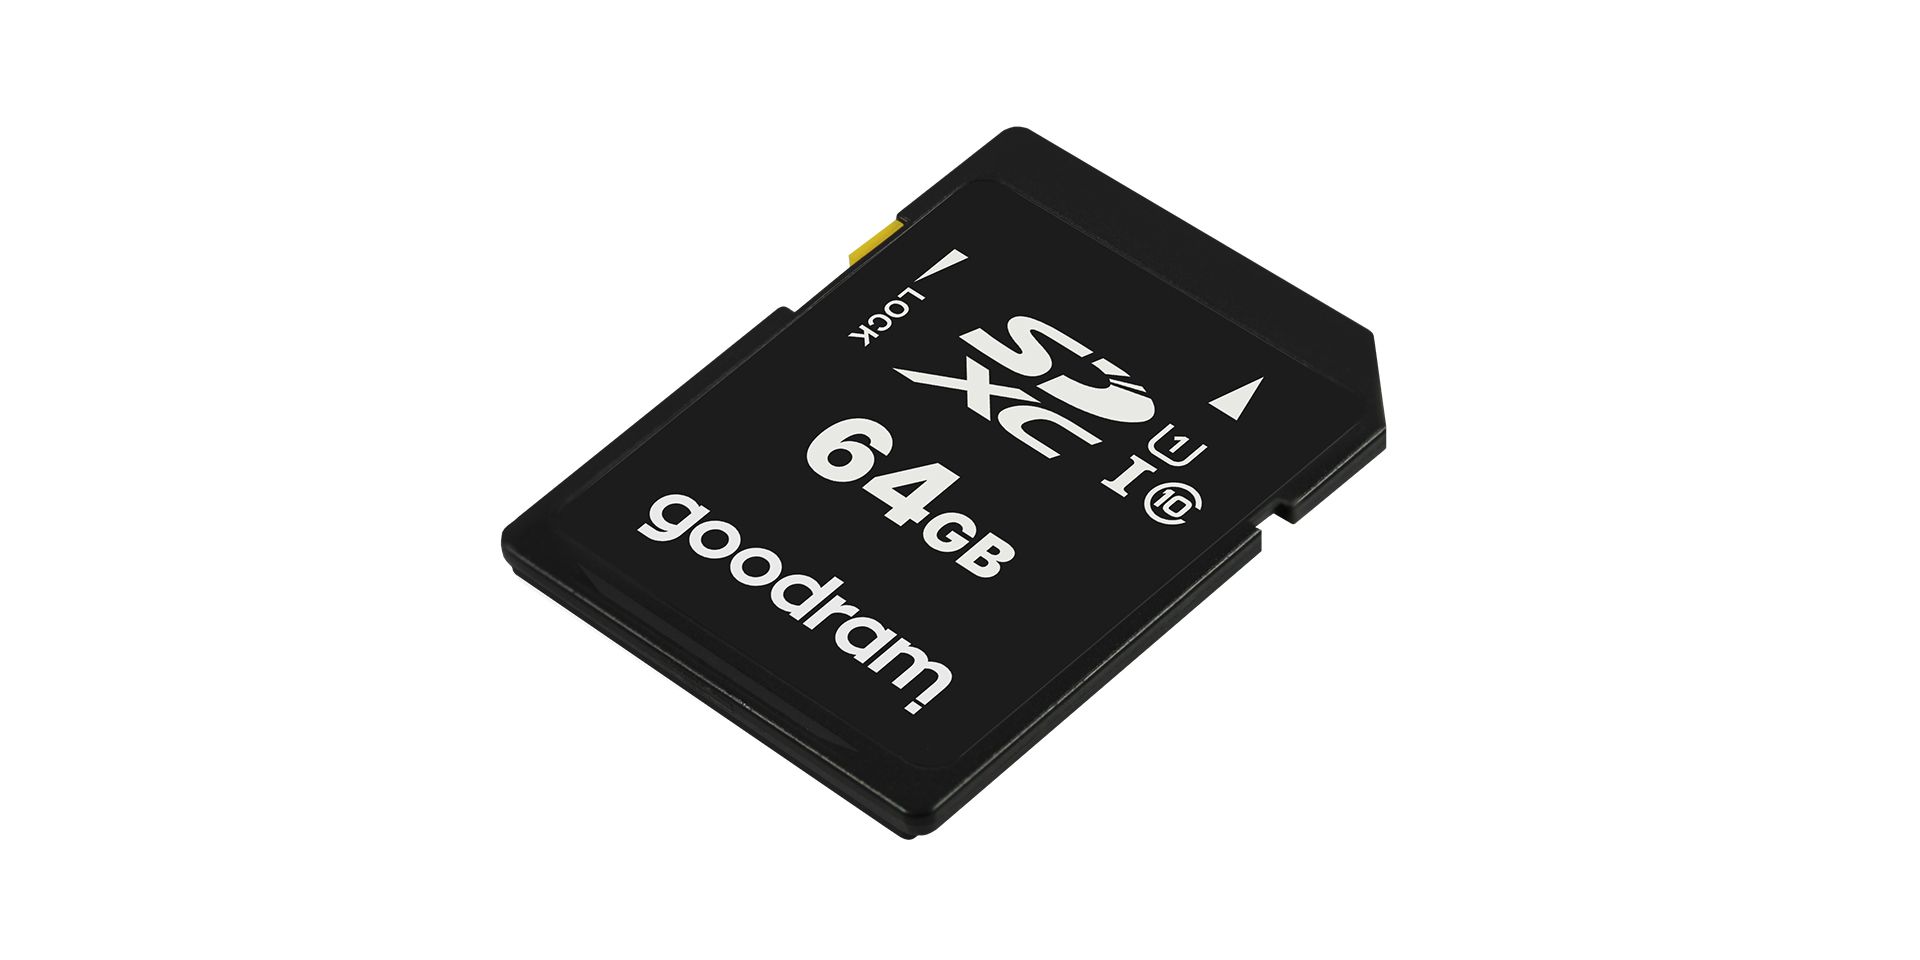 GOODRAM 64GB MEMORY CARD class 10 UHS I read to 100MB/s_1